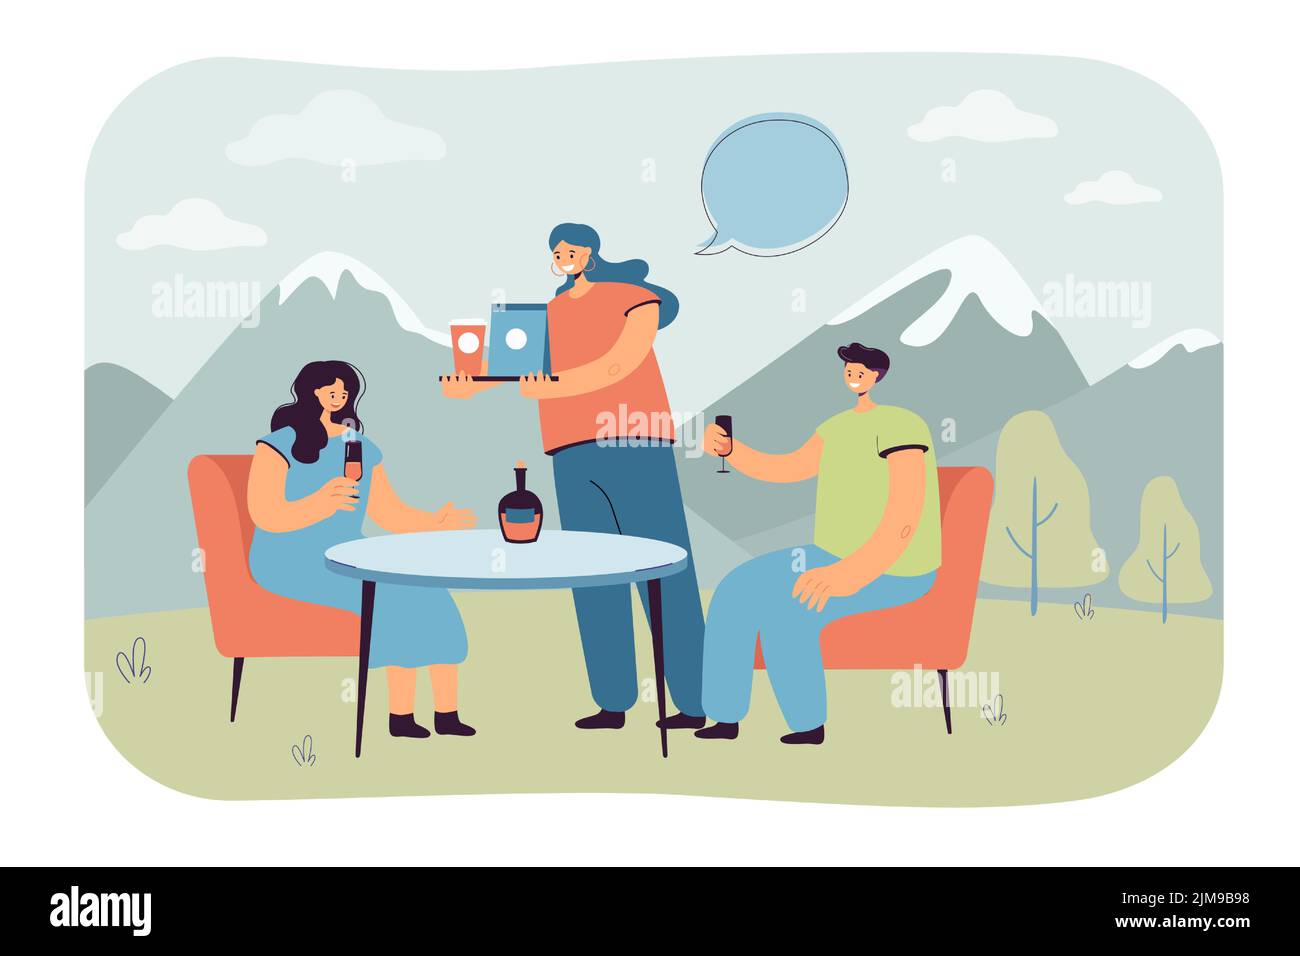 Couple visiting outdoor cafe flat vector illustration. Waiter serving man and woman, bringing food in background of mountain. Date, love concept for b Stock Vector